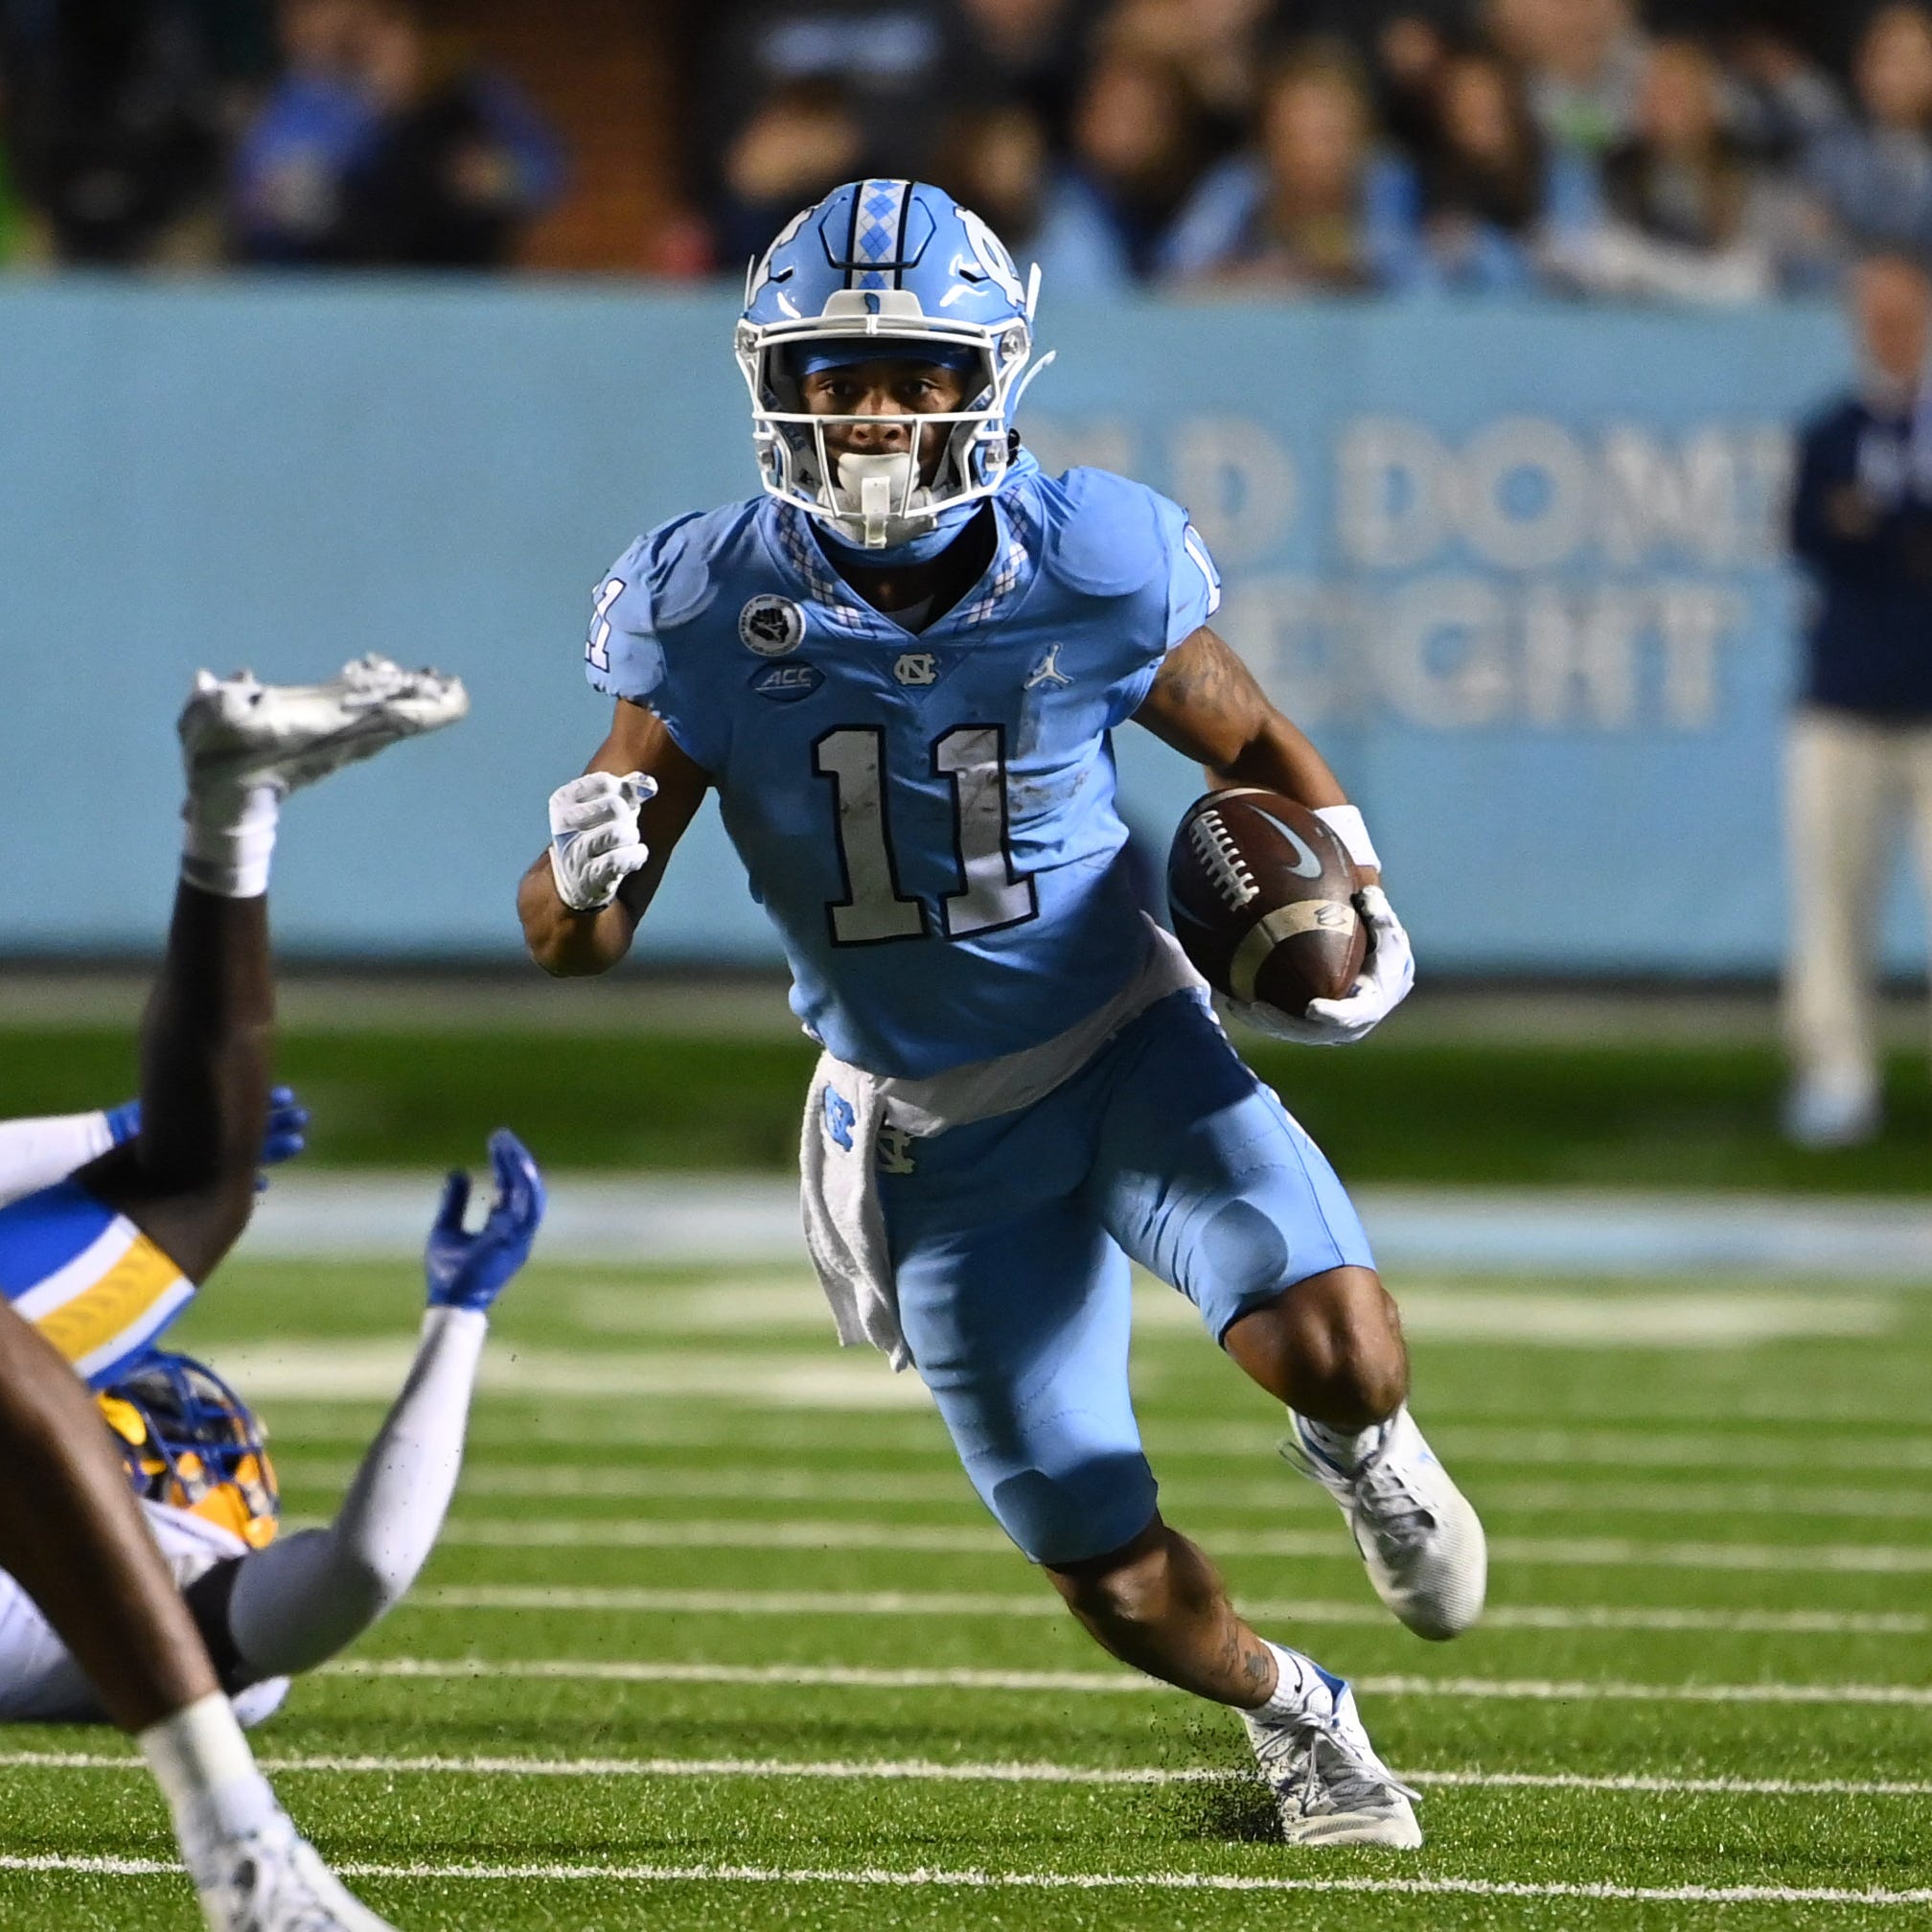 North Carolina Tar Heels wide receiver Josh Downs (11) with the ball in the fourth quarter at Kenan Memorial Stadium.